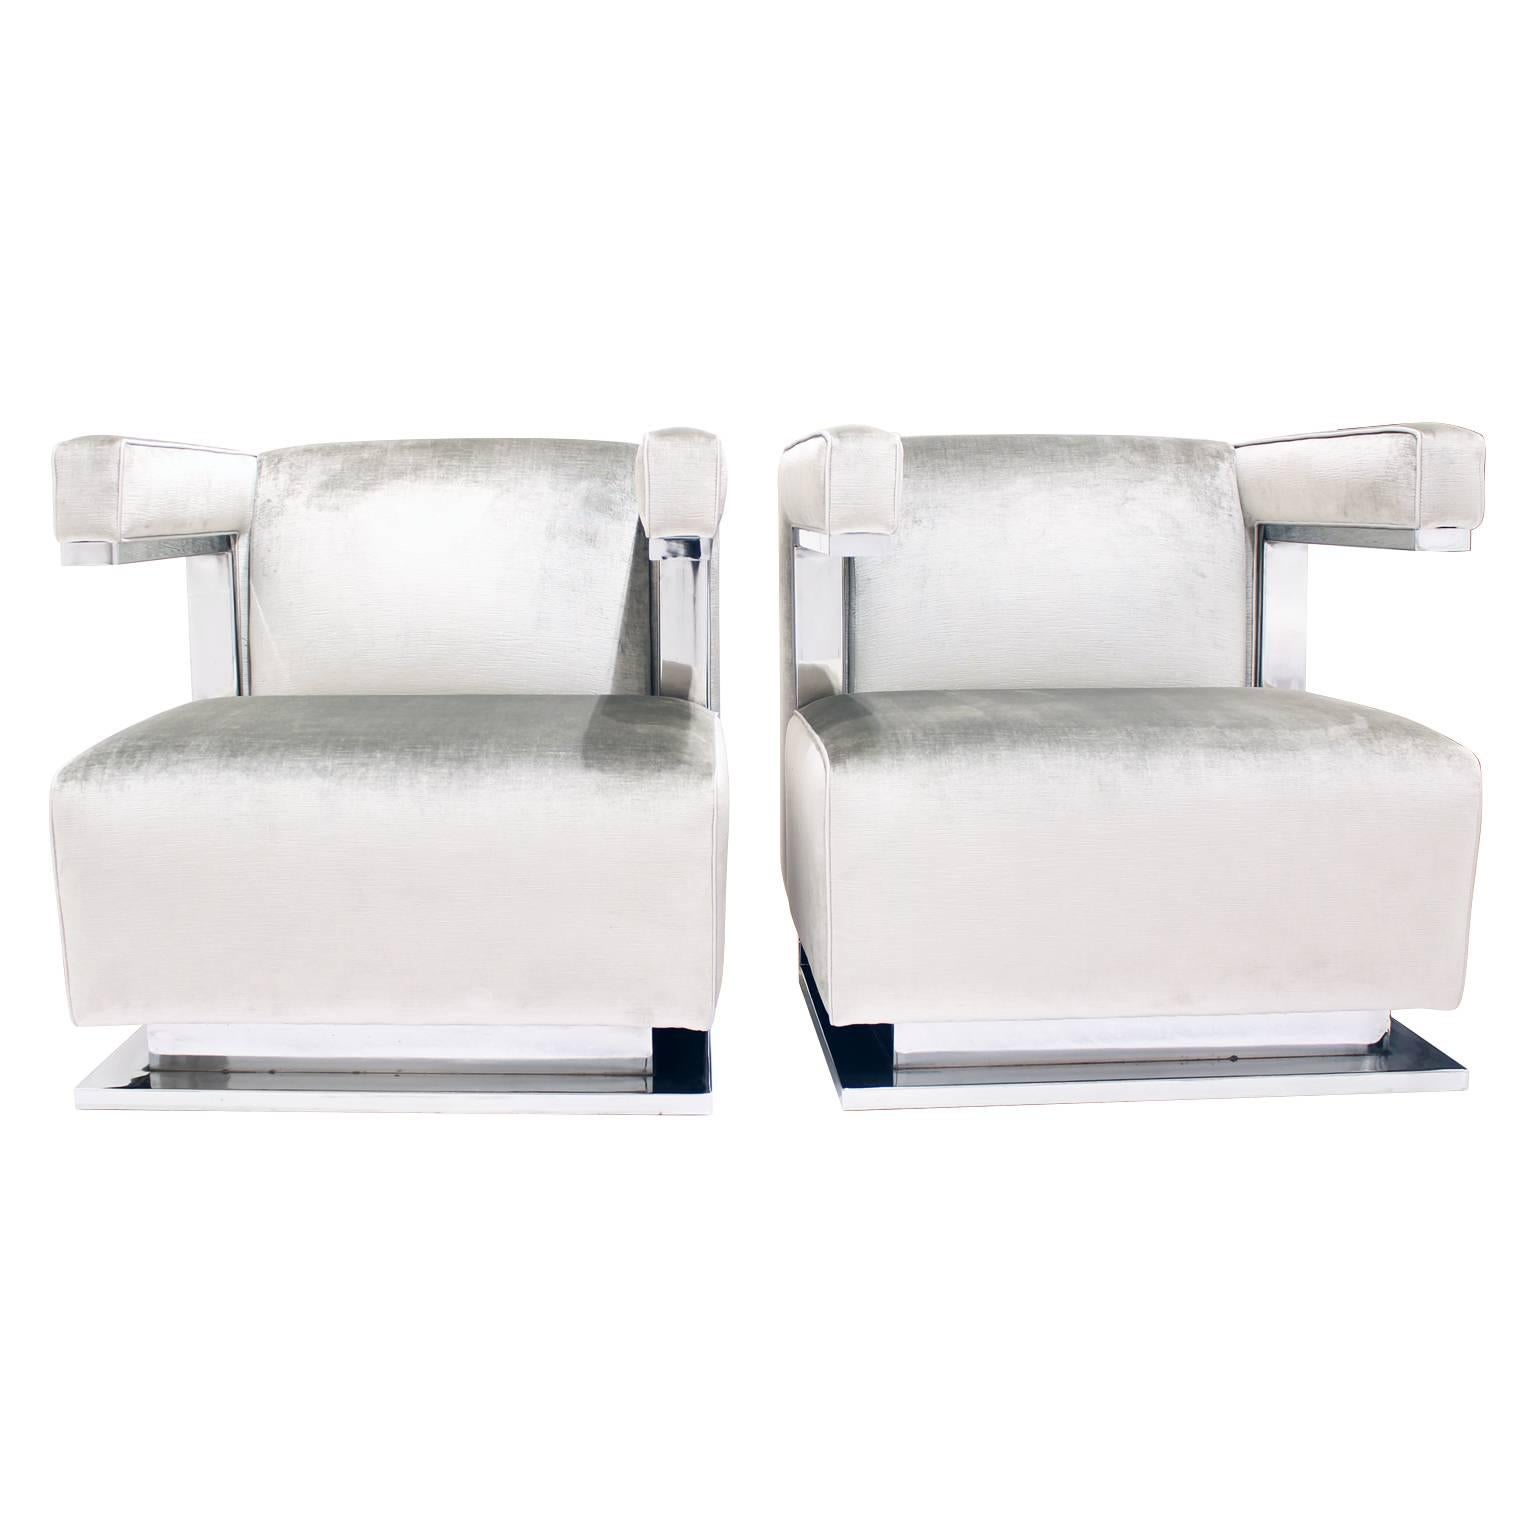 Monumental 1930s Walter Gropius cubist steel and chrome armchairs modeled after Gropius Director's office chair for Bauhaus. These armchairs have been reupholstered in a luxurious pewter cotton velvet. Chrome has age appropriate indications of use